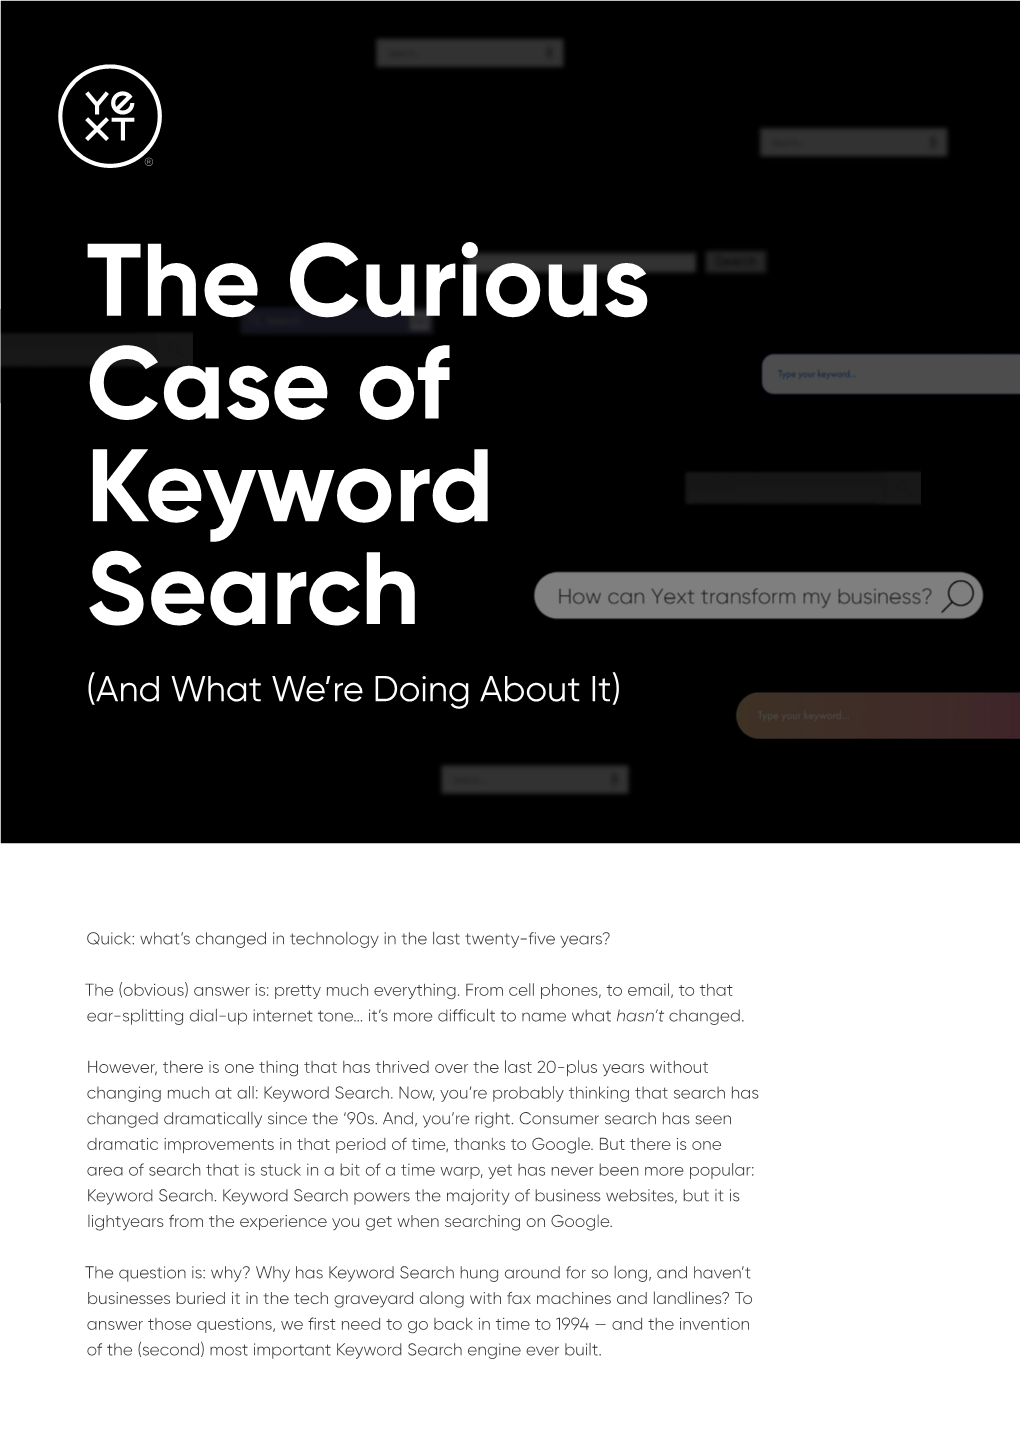 The Curious Case of Keyword Search (And What We’Re Doing About It)